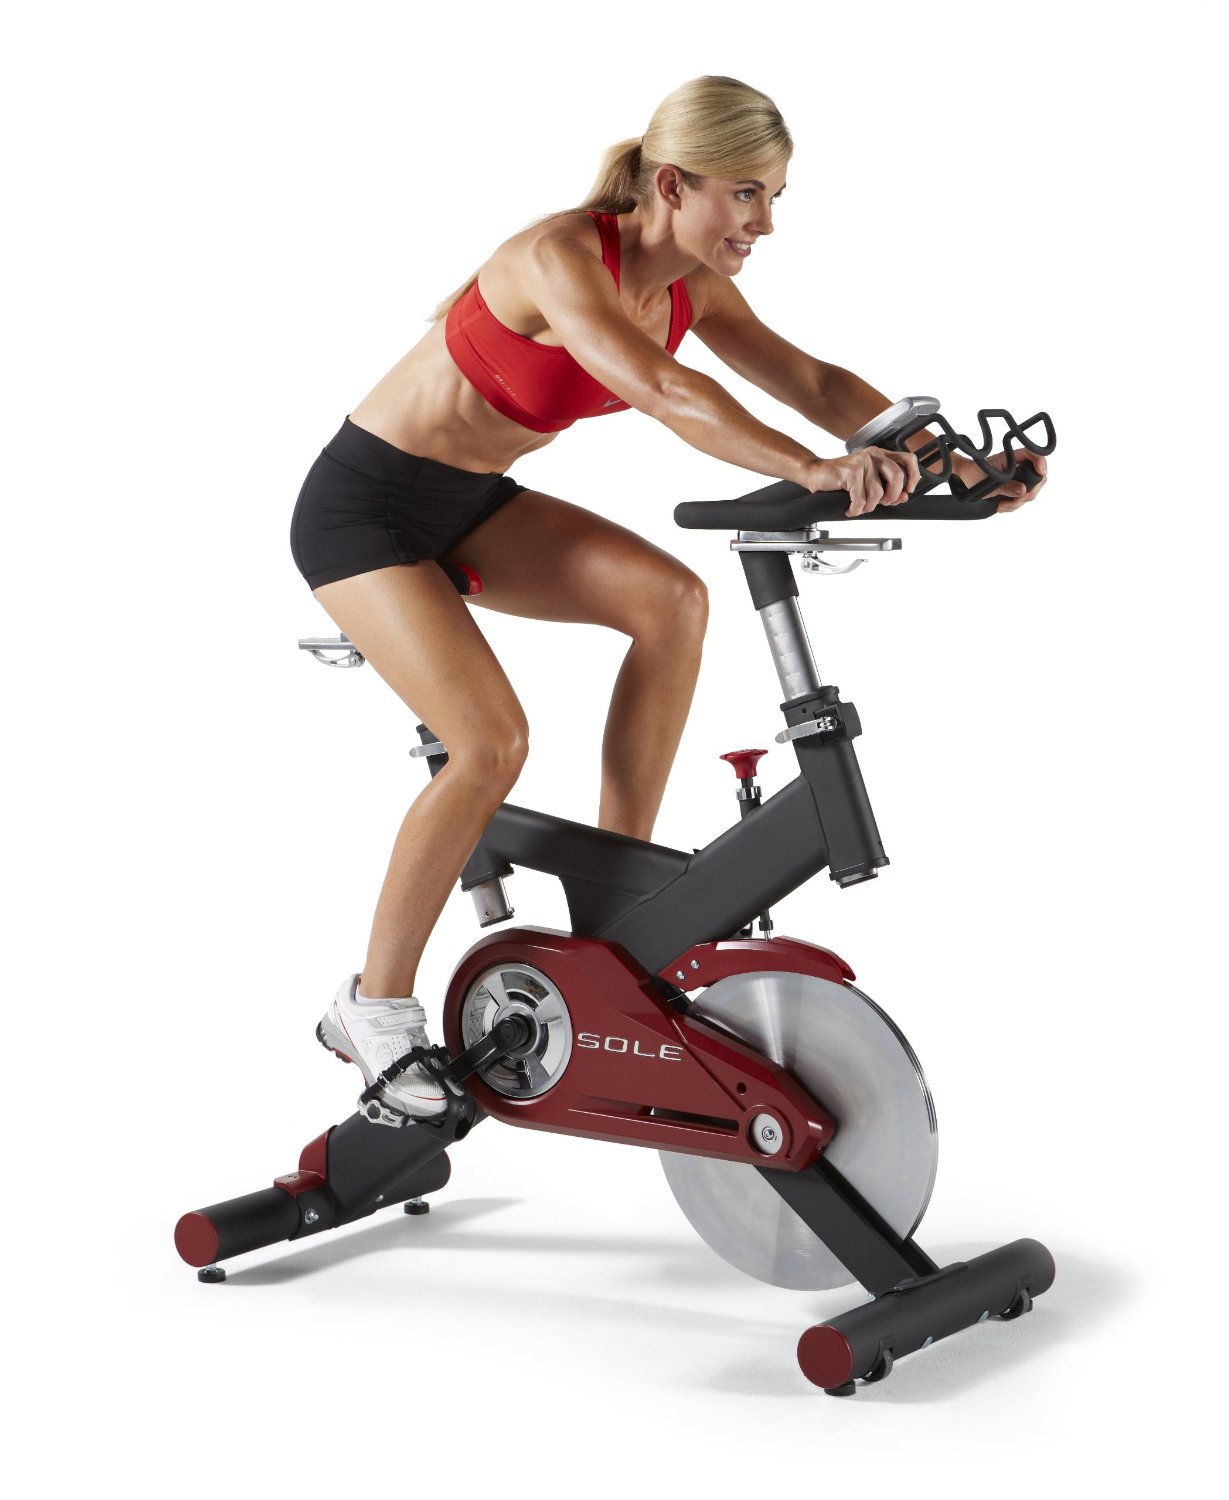 Fitleader Indoor Exercise bike Upright Home Cycling Gym Stationary Cardio Bike 